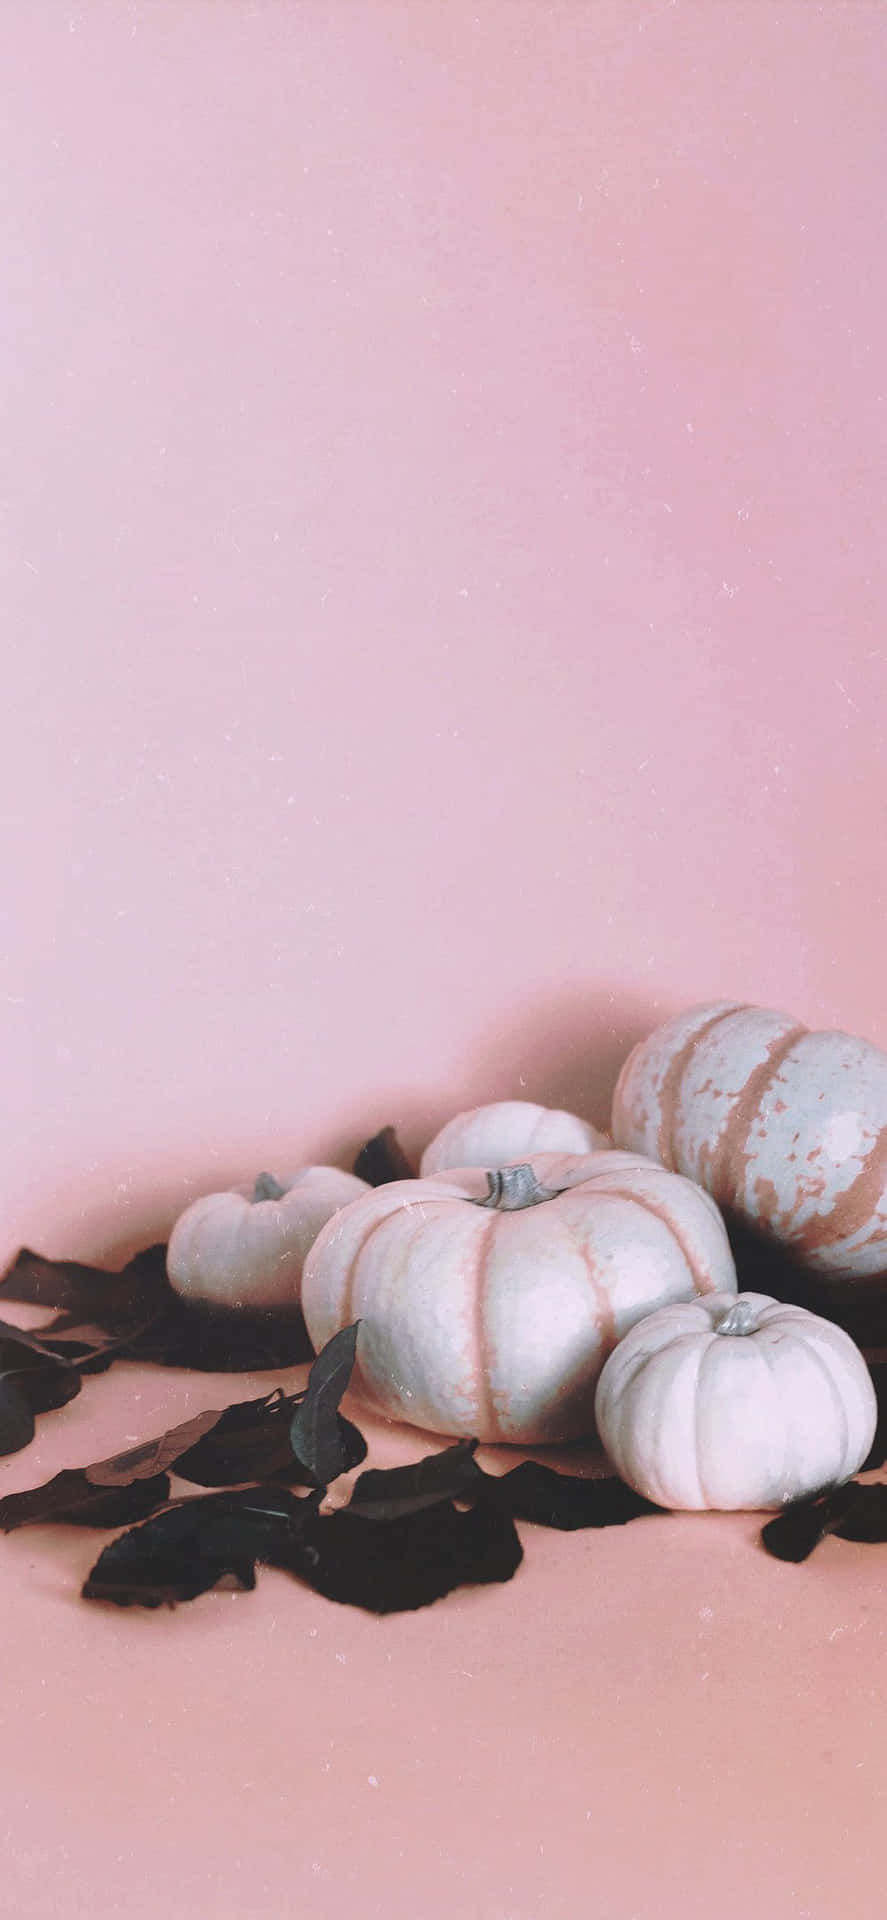 A Brightly Coloured Pink Pumpkin Wallpaper